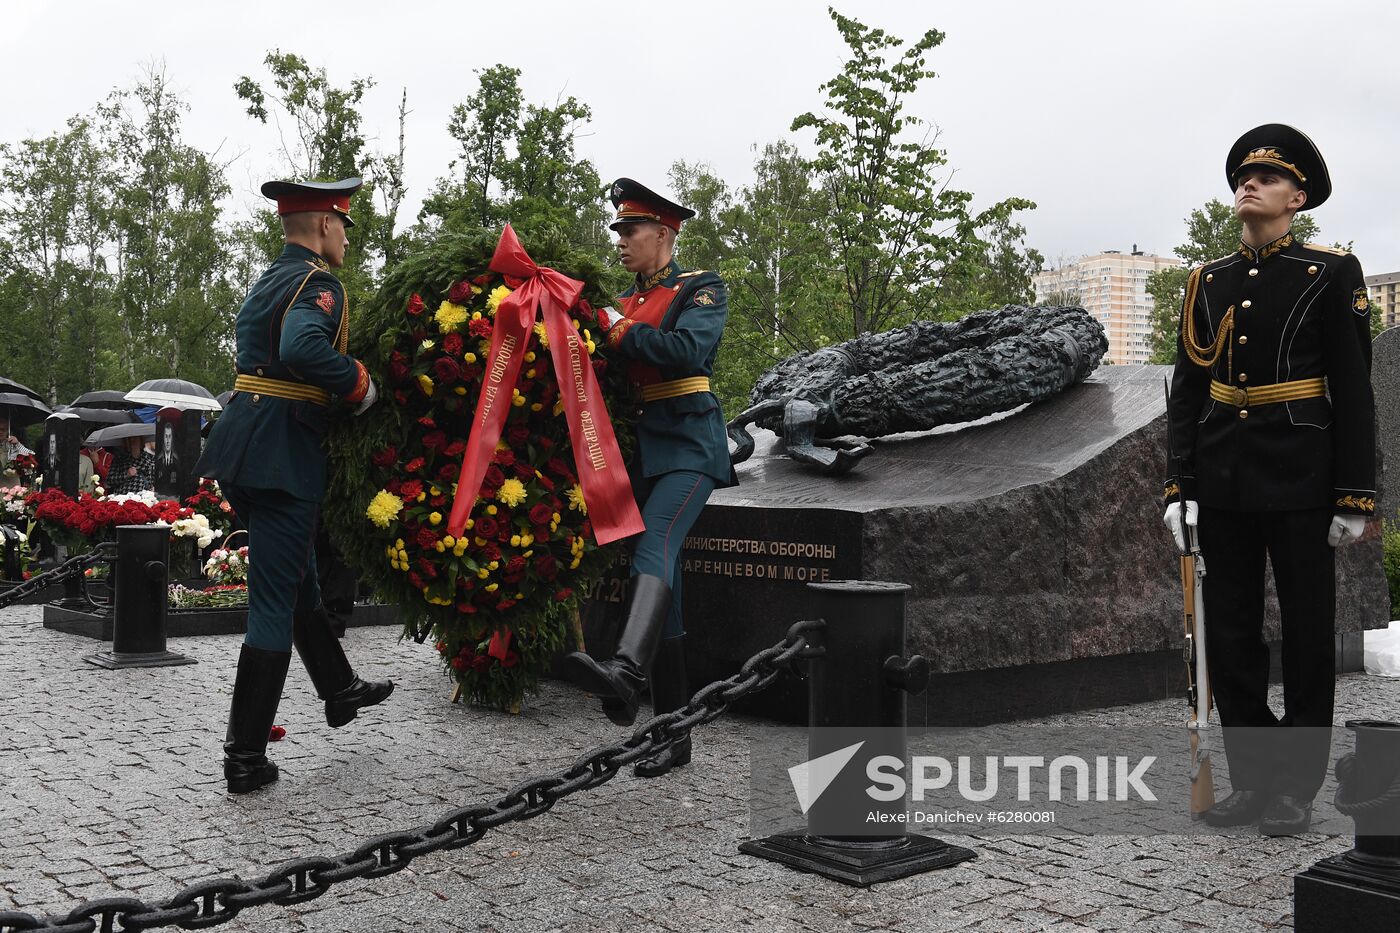 Russia Submersible Fire Memorial